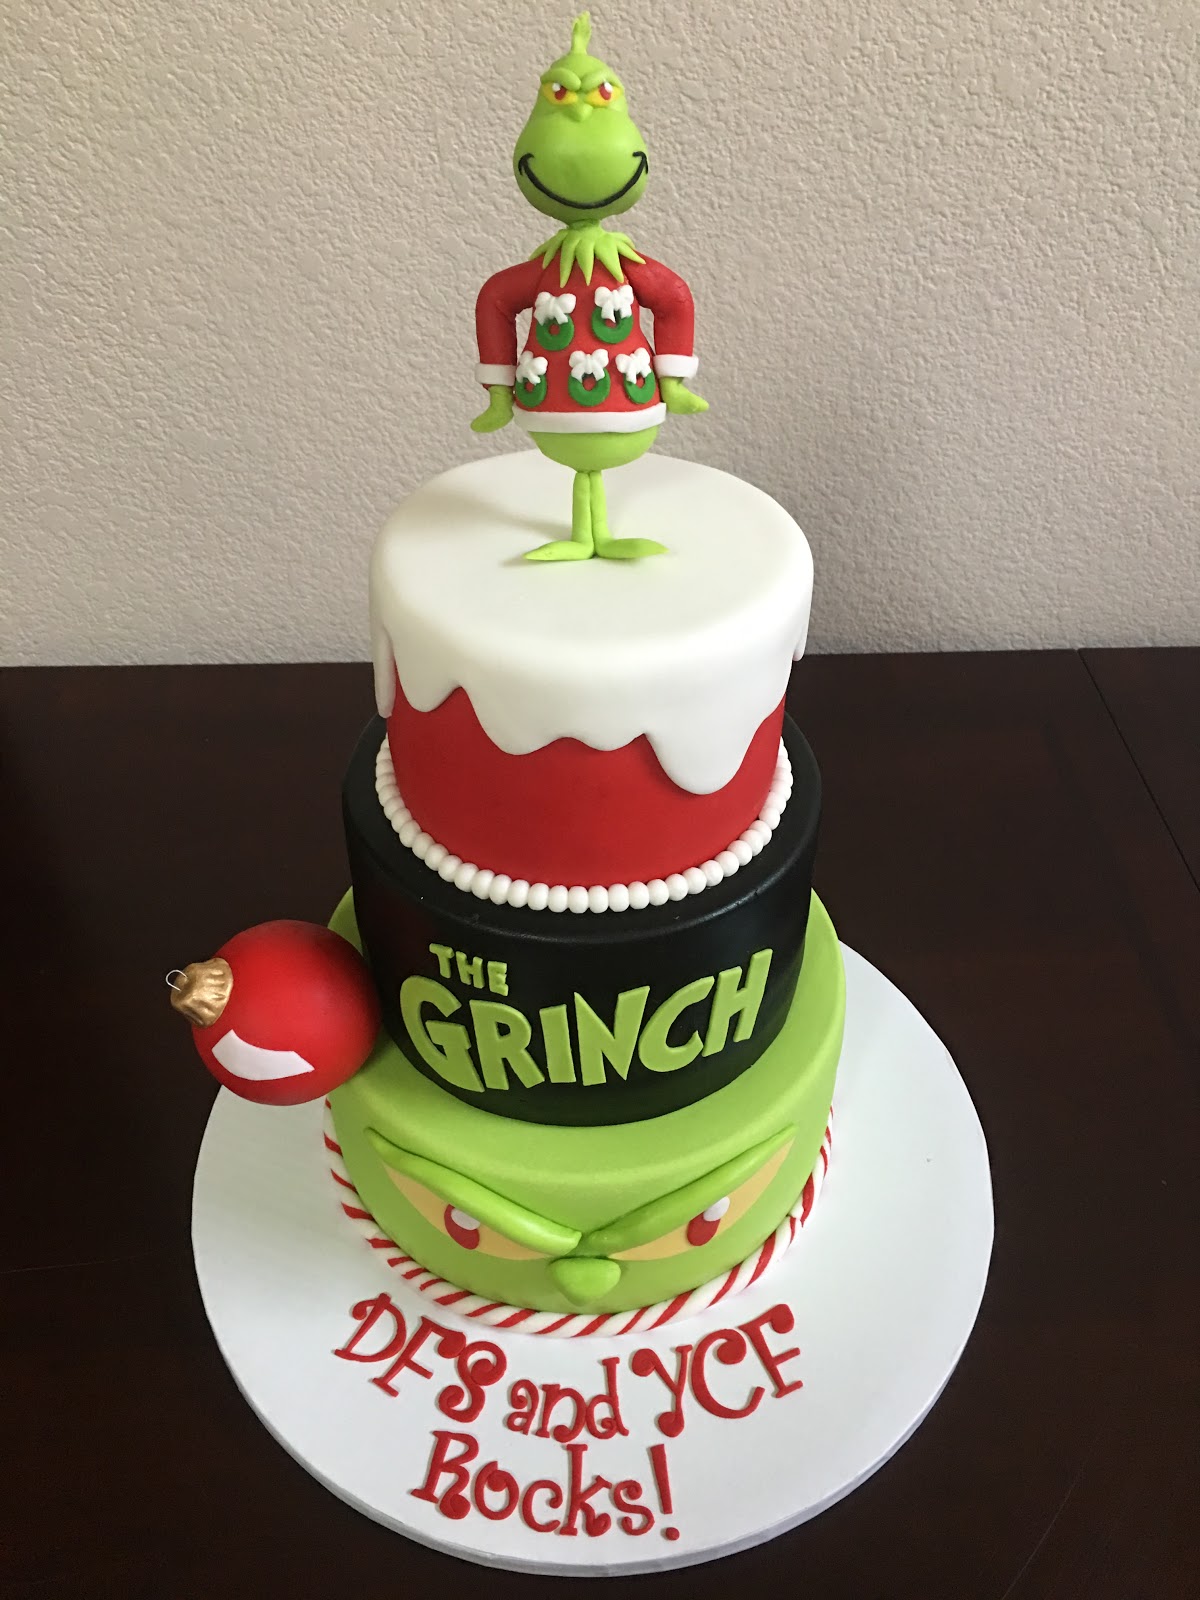 How to make a Grinch Cake | Grinch cake, Christmas cake, Grinch ...